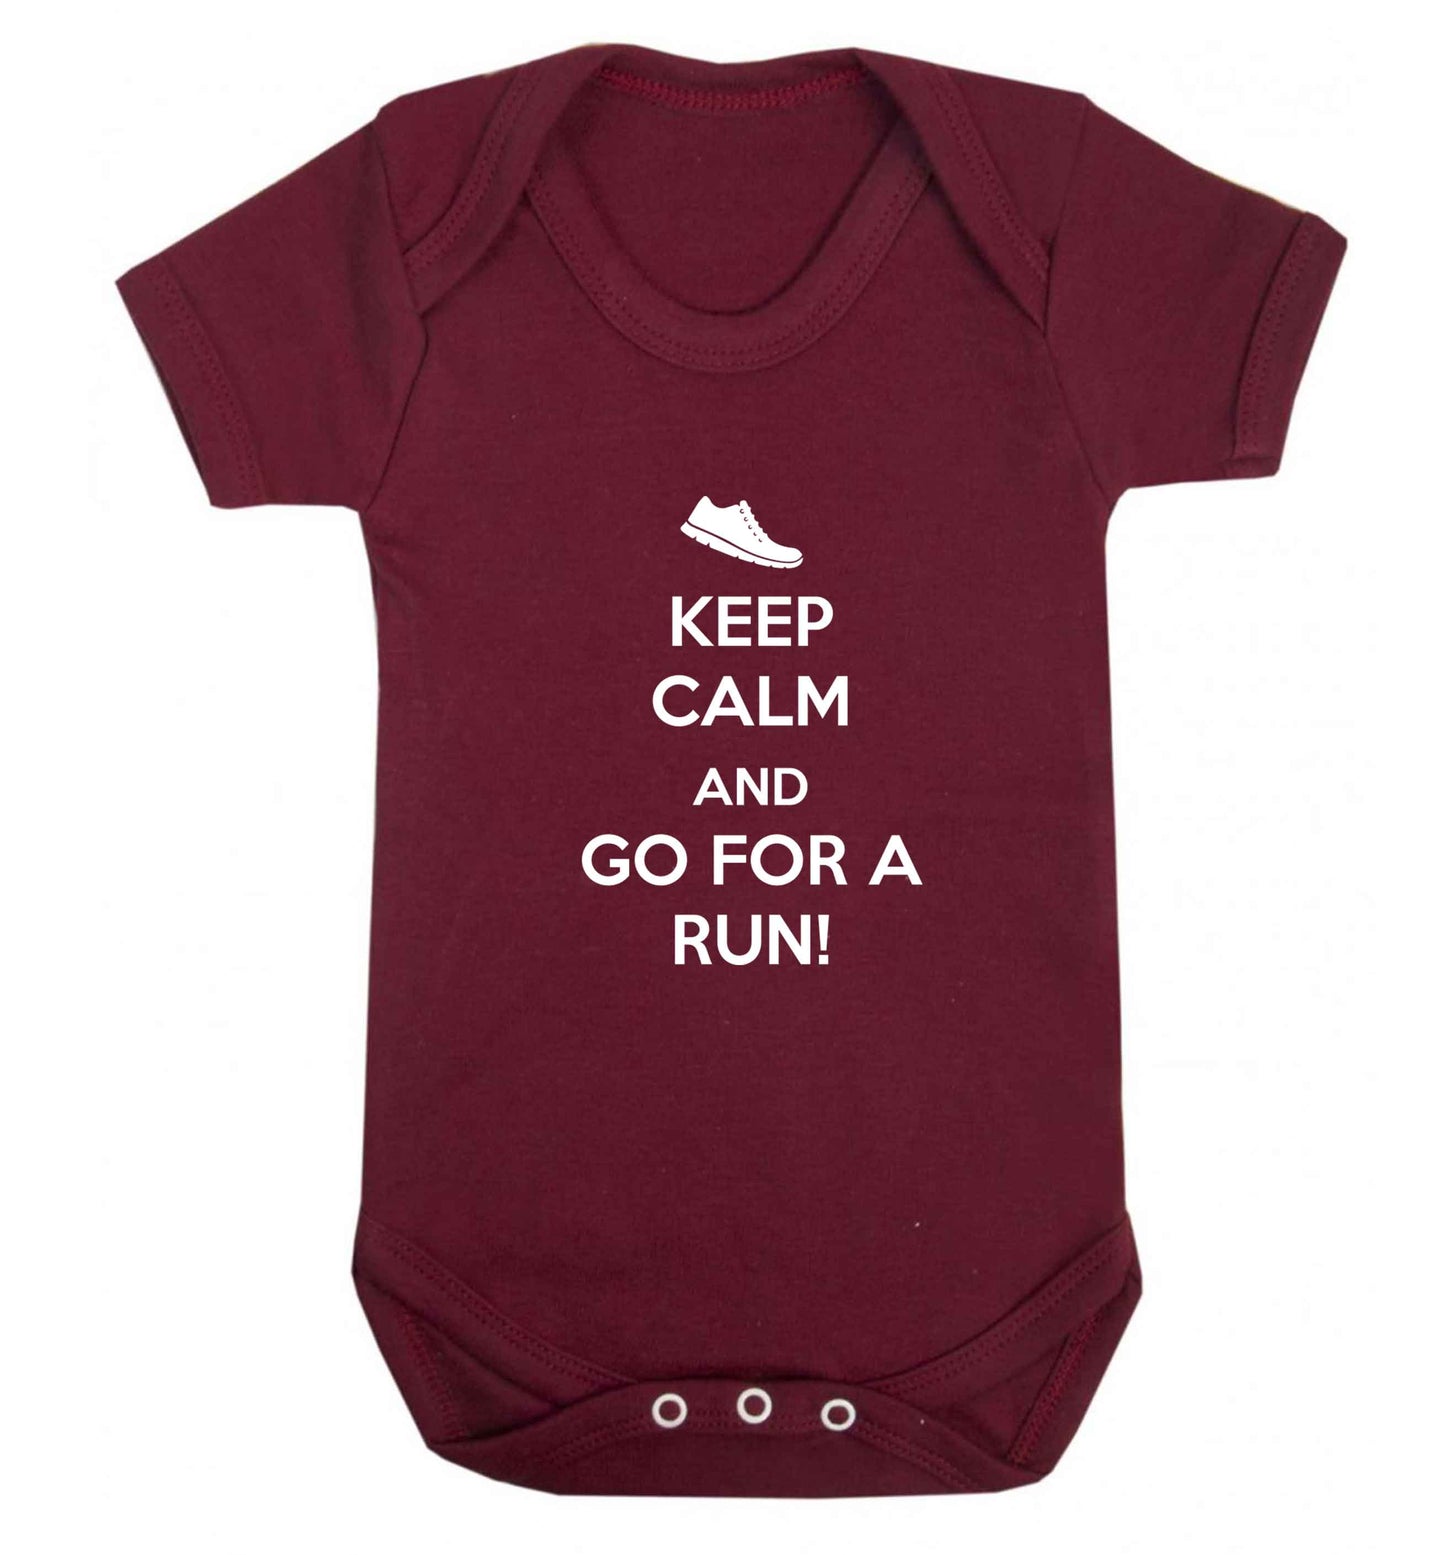 Keep calm and go for a run baby vest maroon 18-24 months